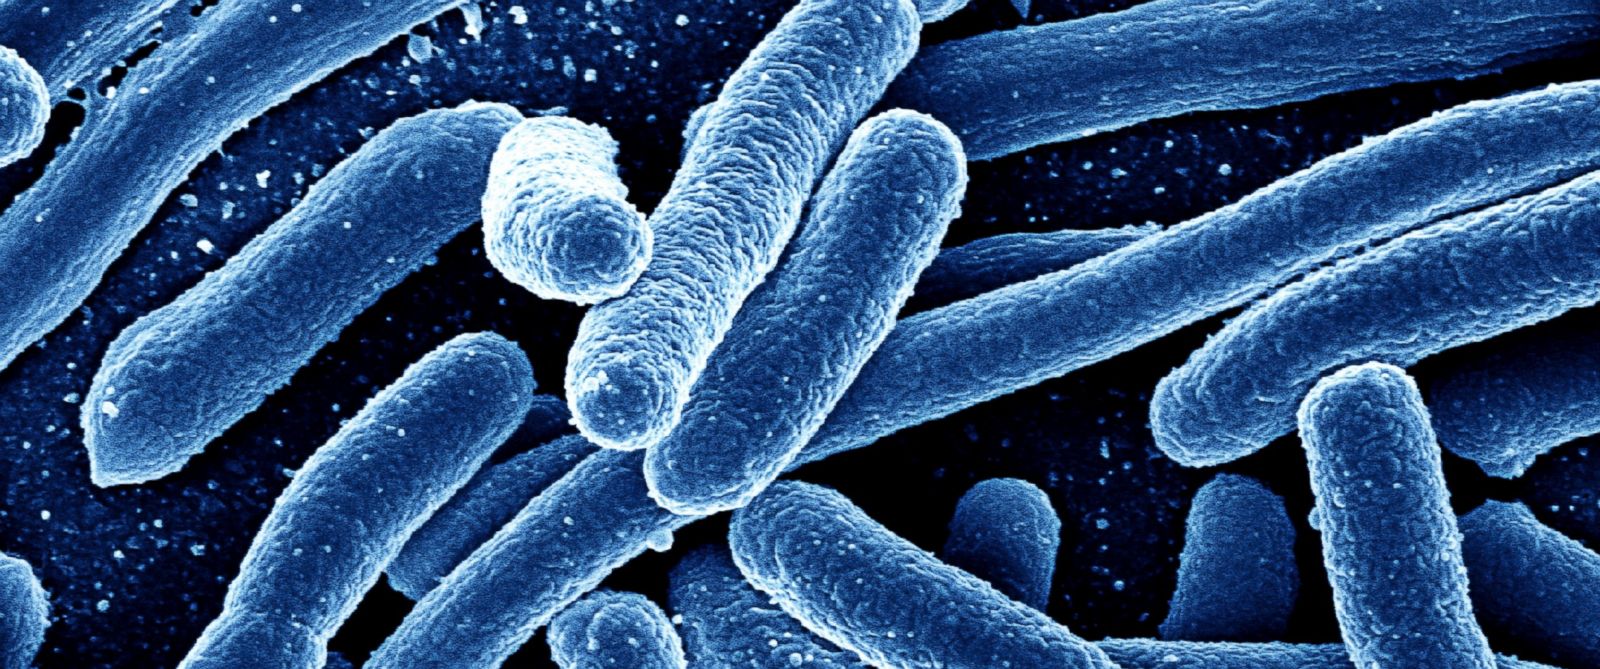 Image: Antidepressants linked to rise in superbugs, study finds